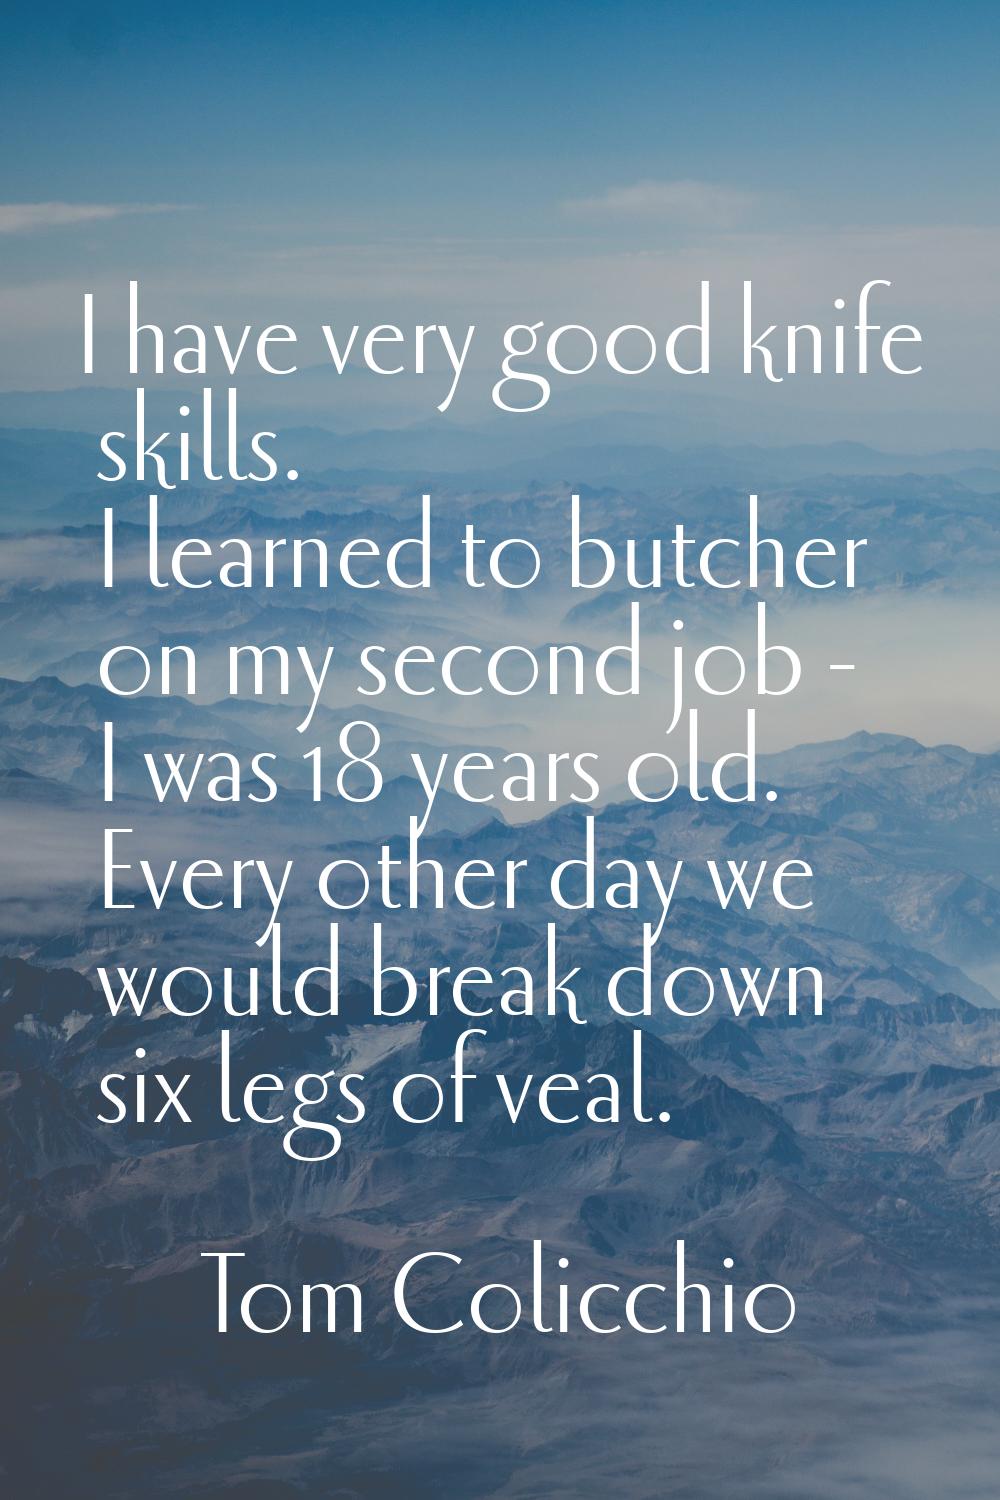 I have very good knife skills. I learned to butcher on my second job - I was 18 years old. Every ot